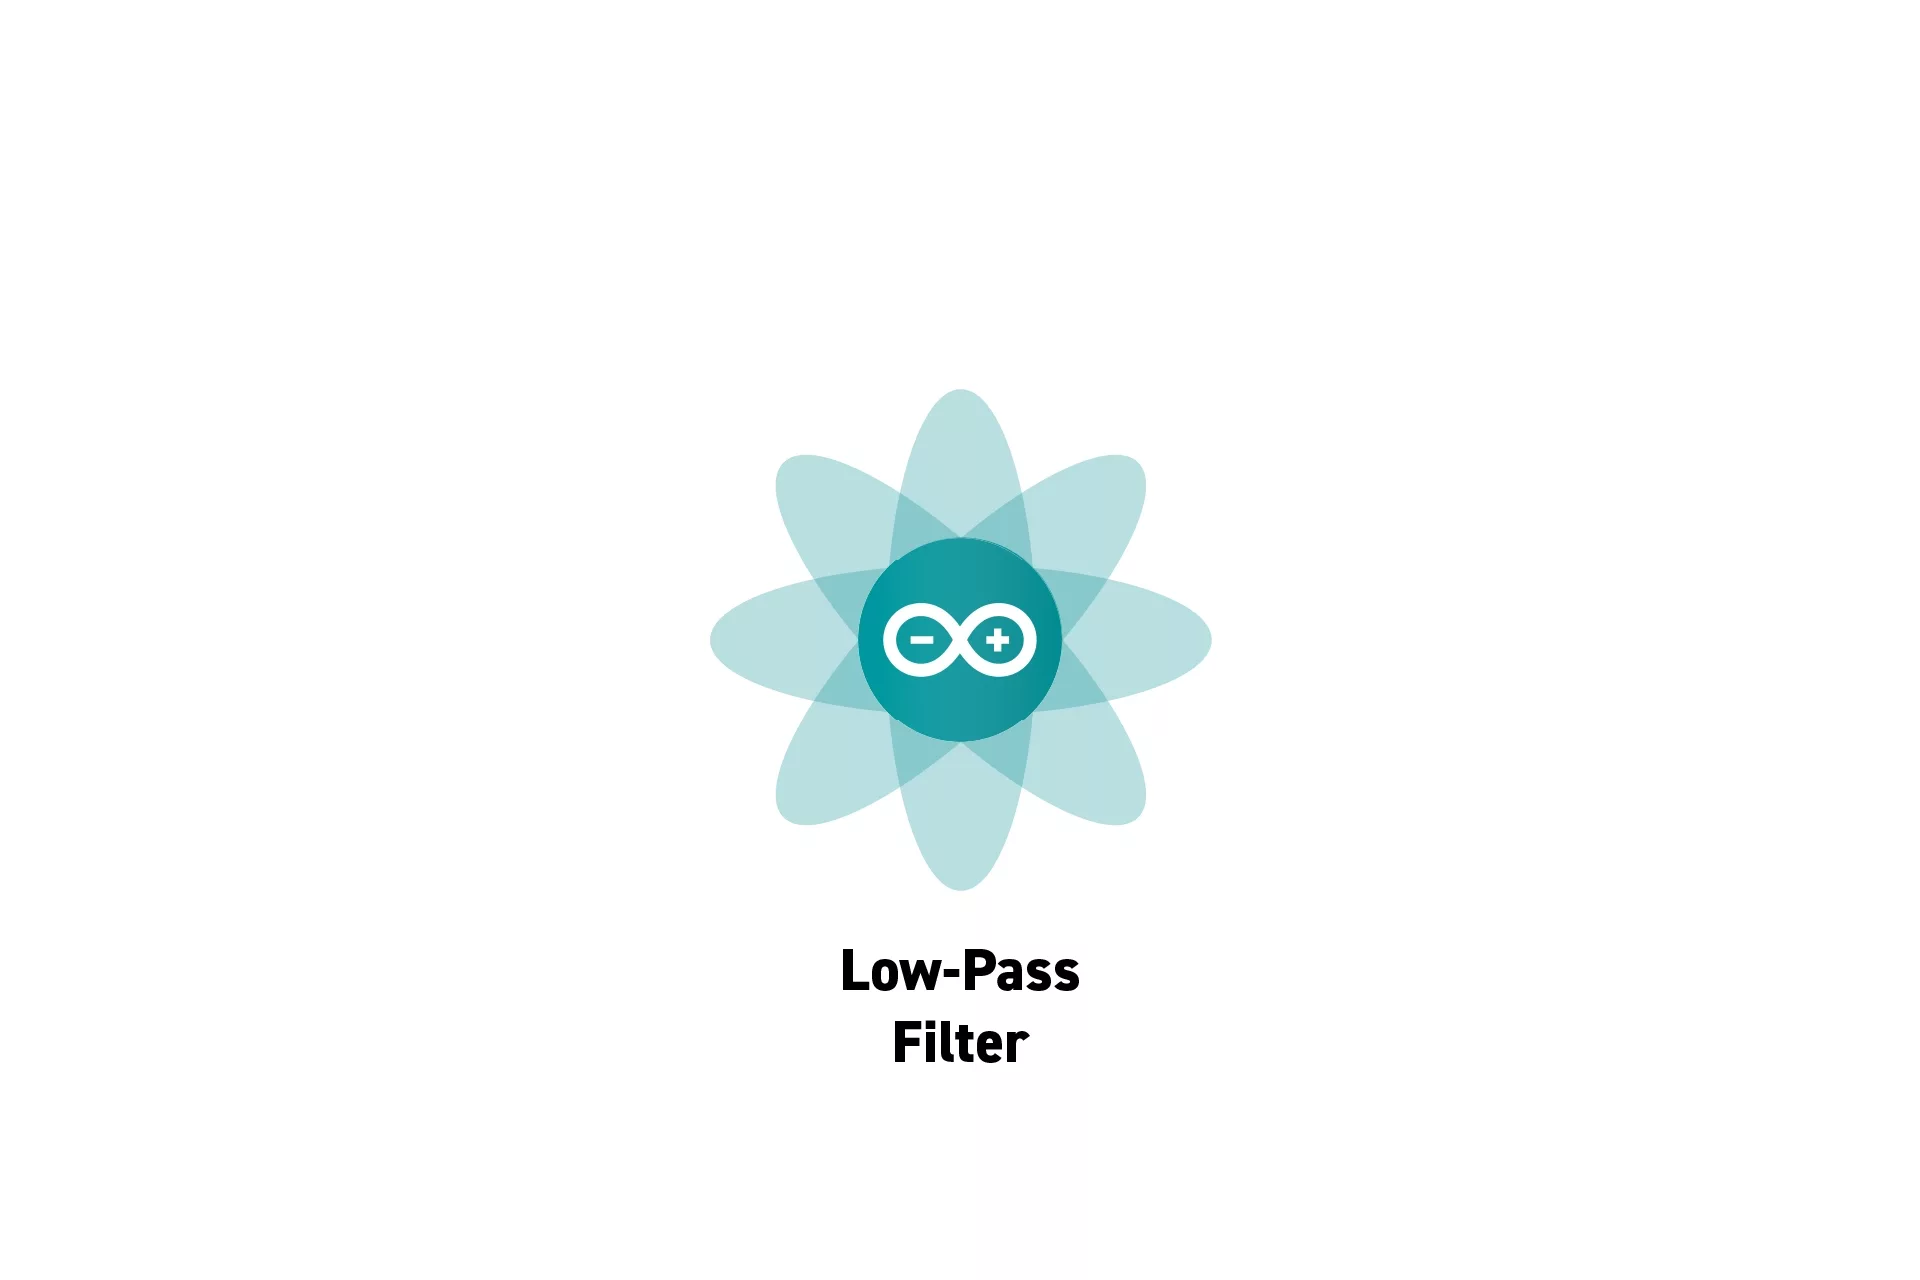 A flower that represents Arduino with the text "Low-Pass Filter" beneath it.